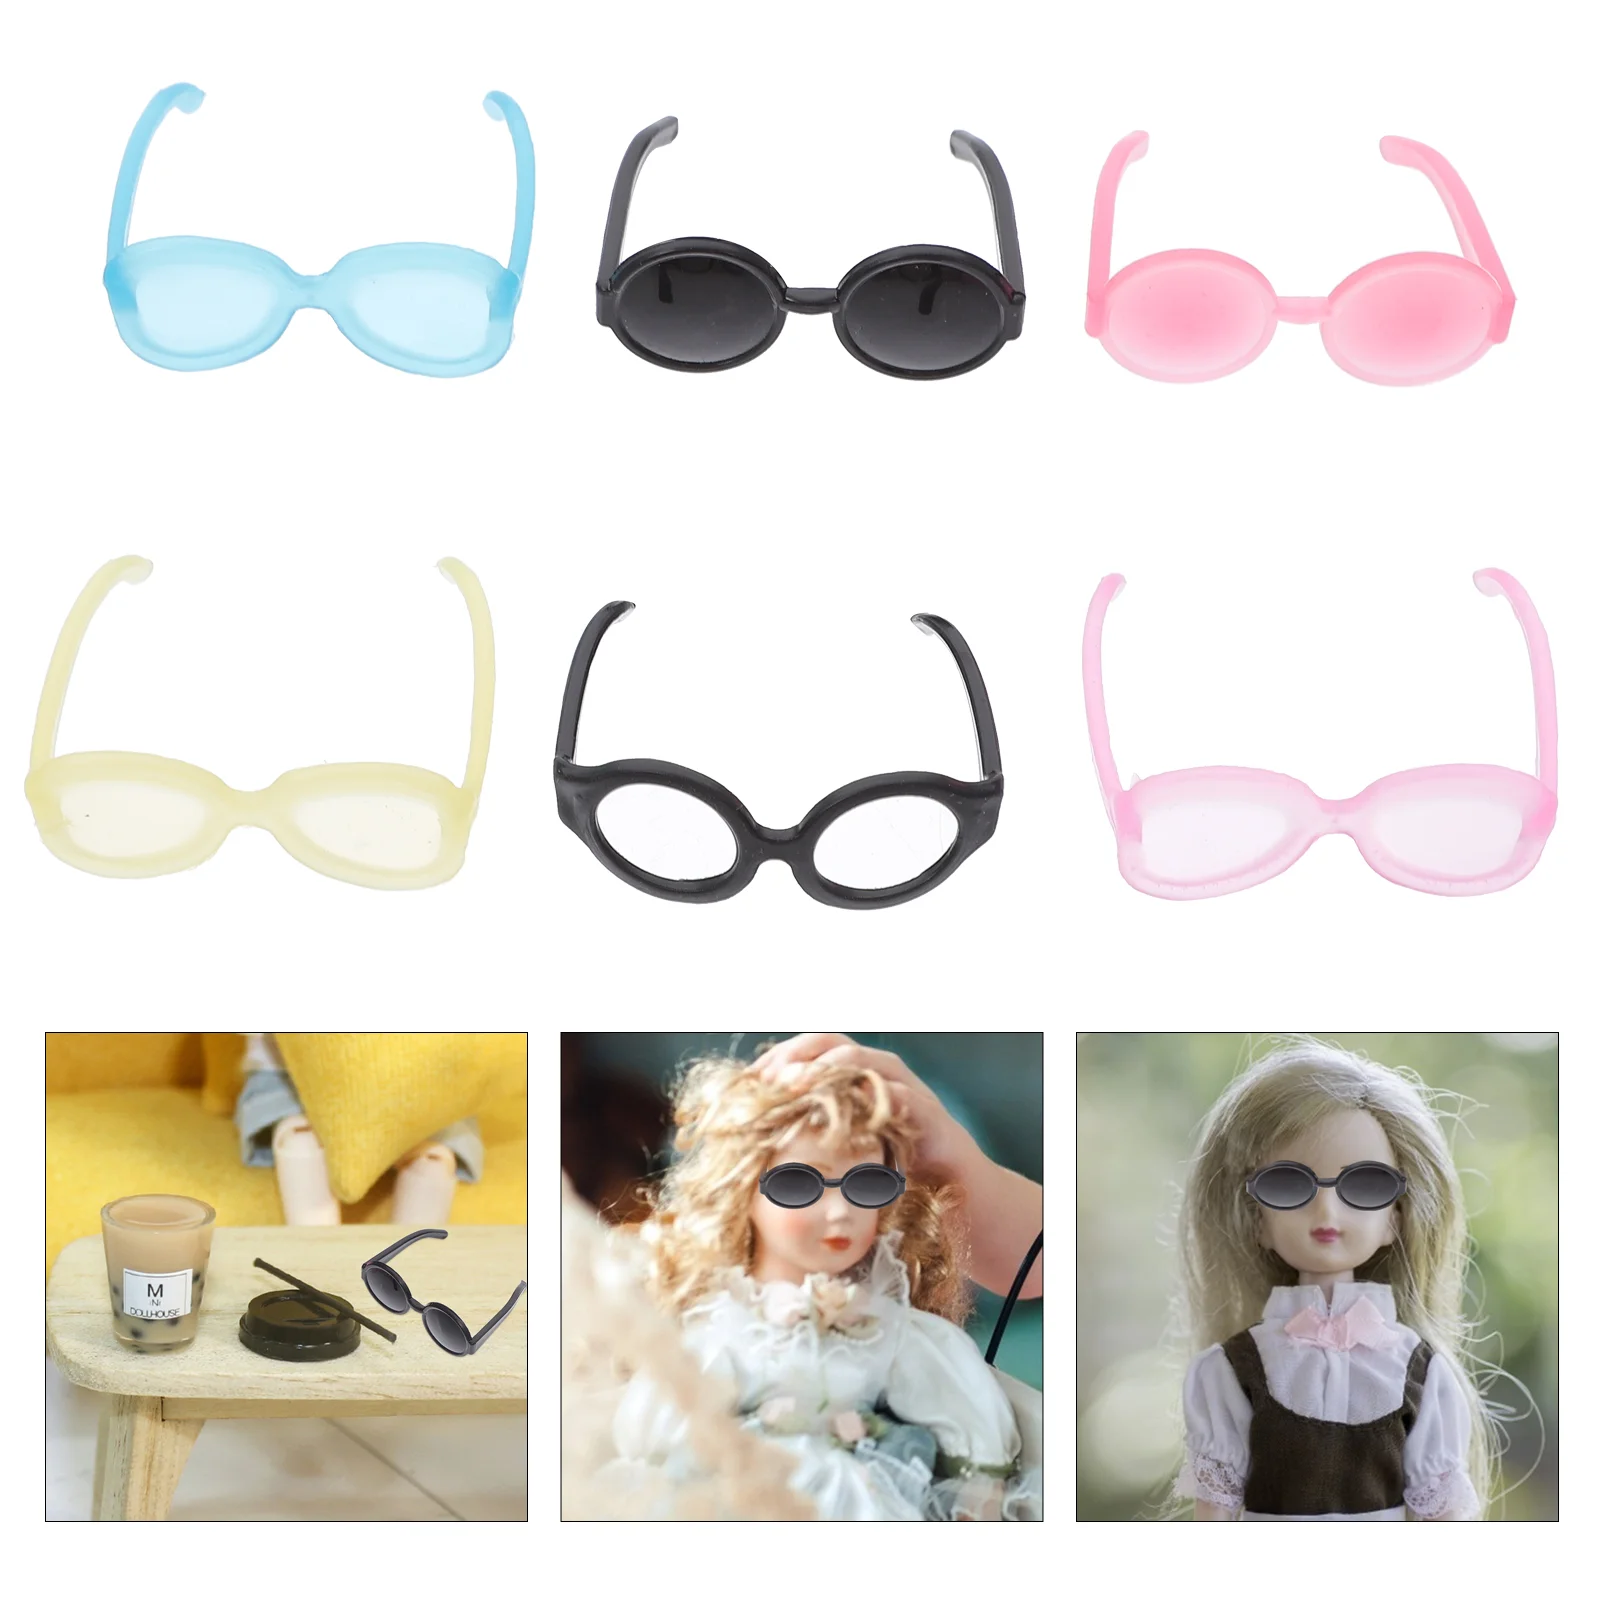 

Glasses Sunglassesminieyeglasses Accessories Inch Dressing Crafts Miniature Dollhousebaby Toy Play Tiny Costume Dressprops